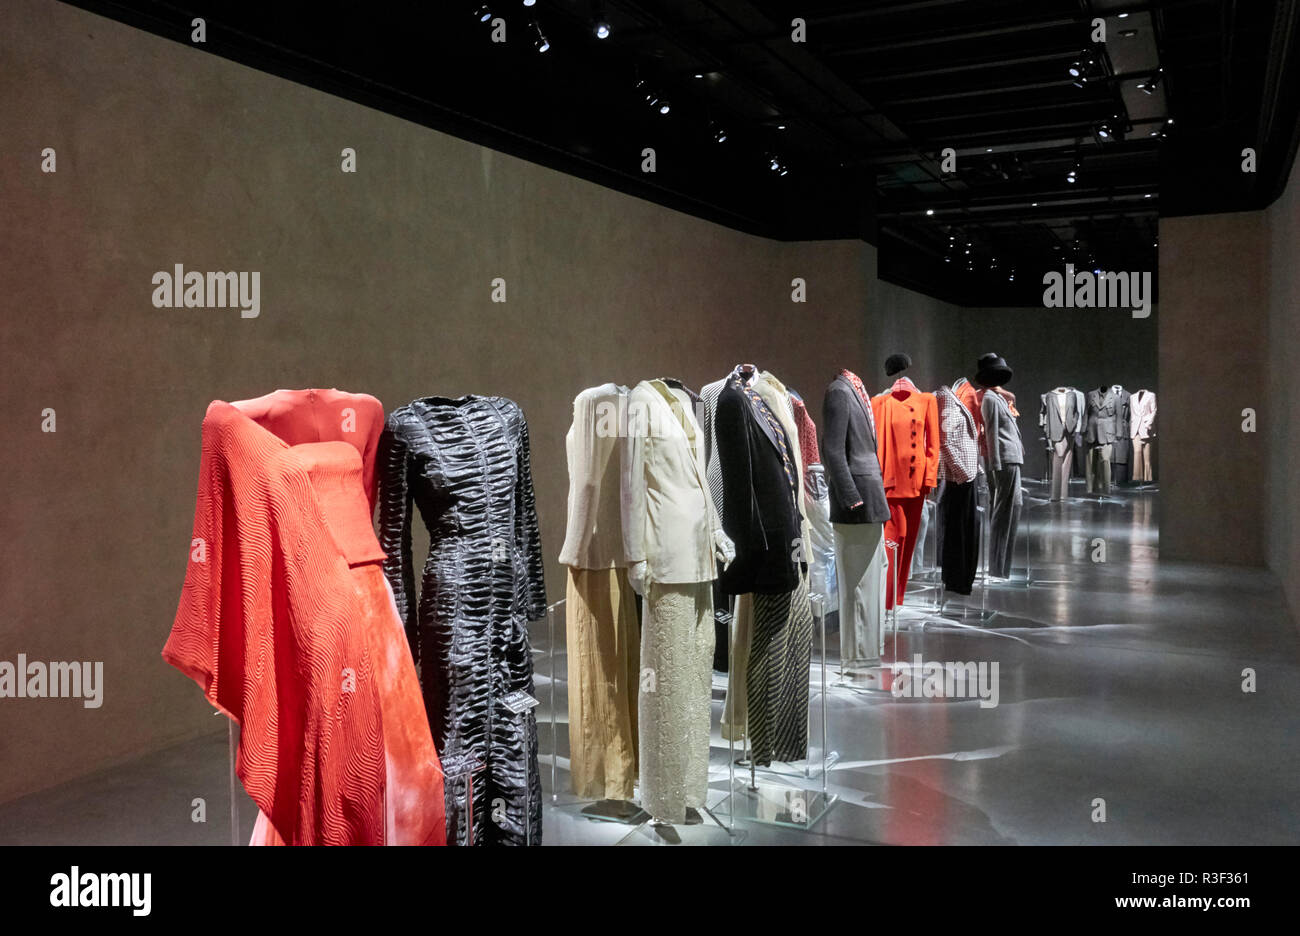 Armani Silos, Milano Italy. Clothes and accessories from the ...